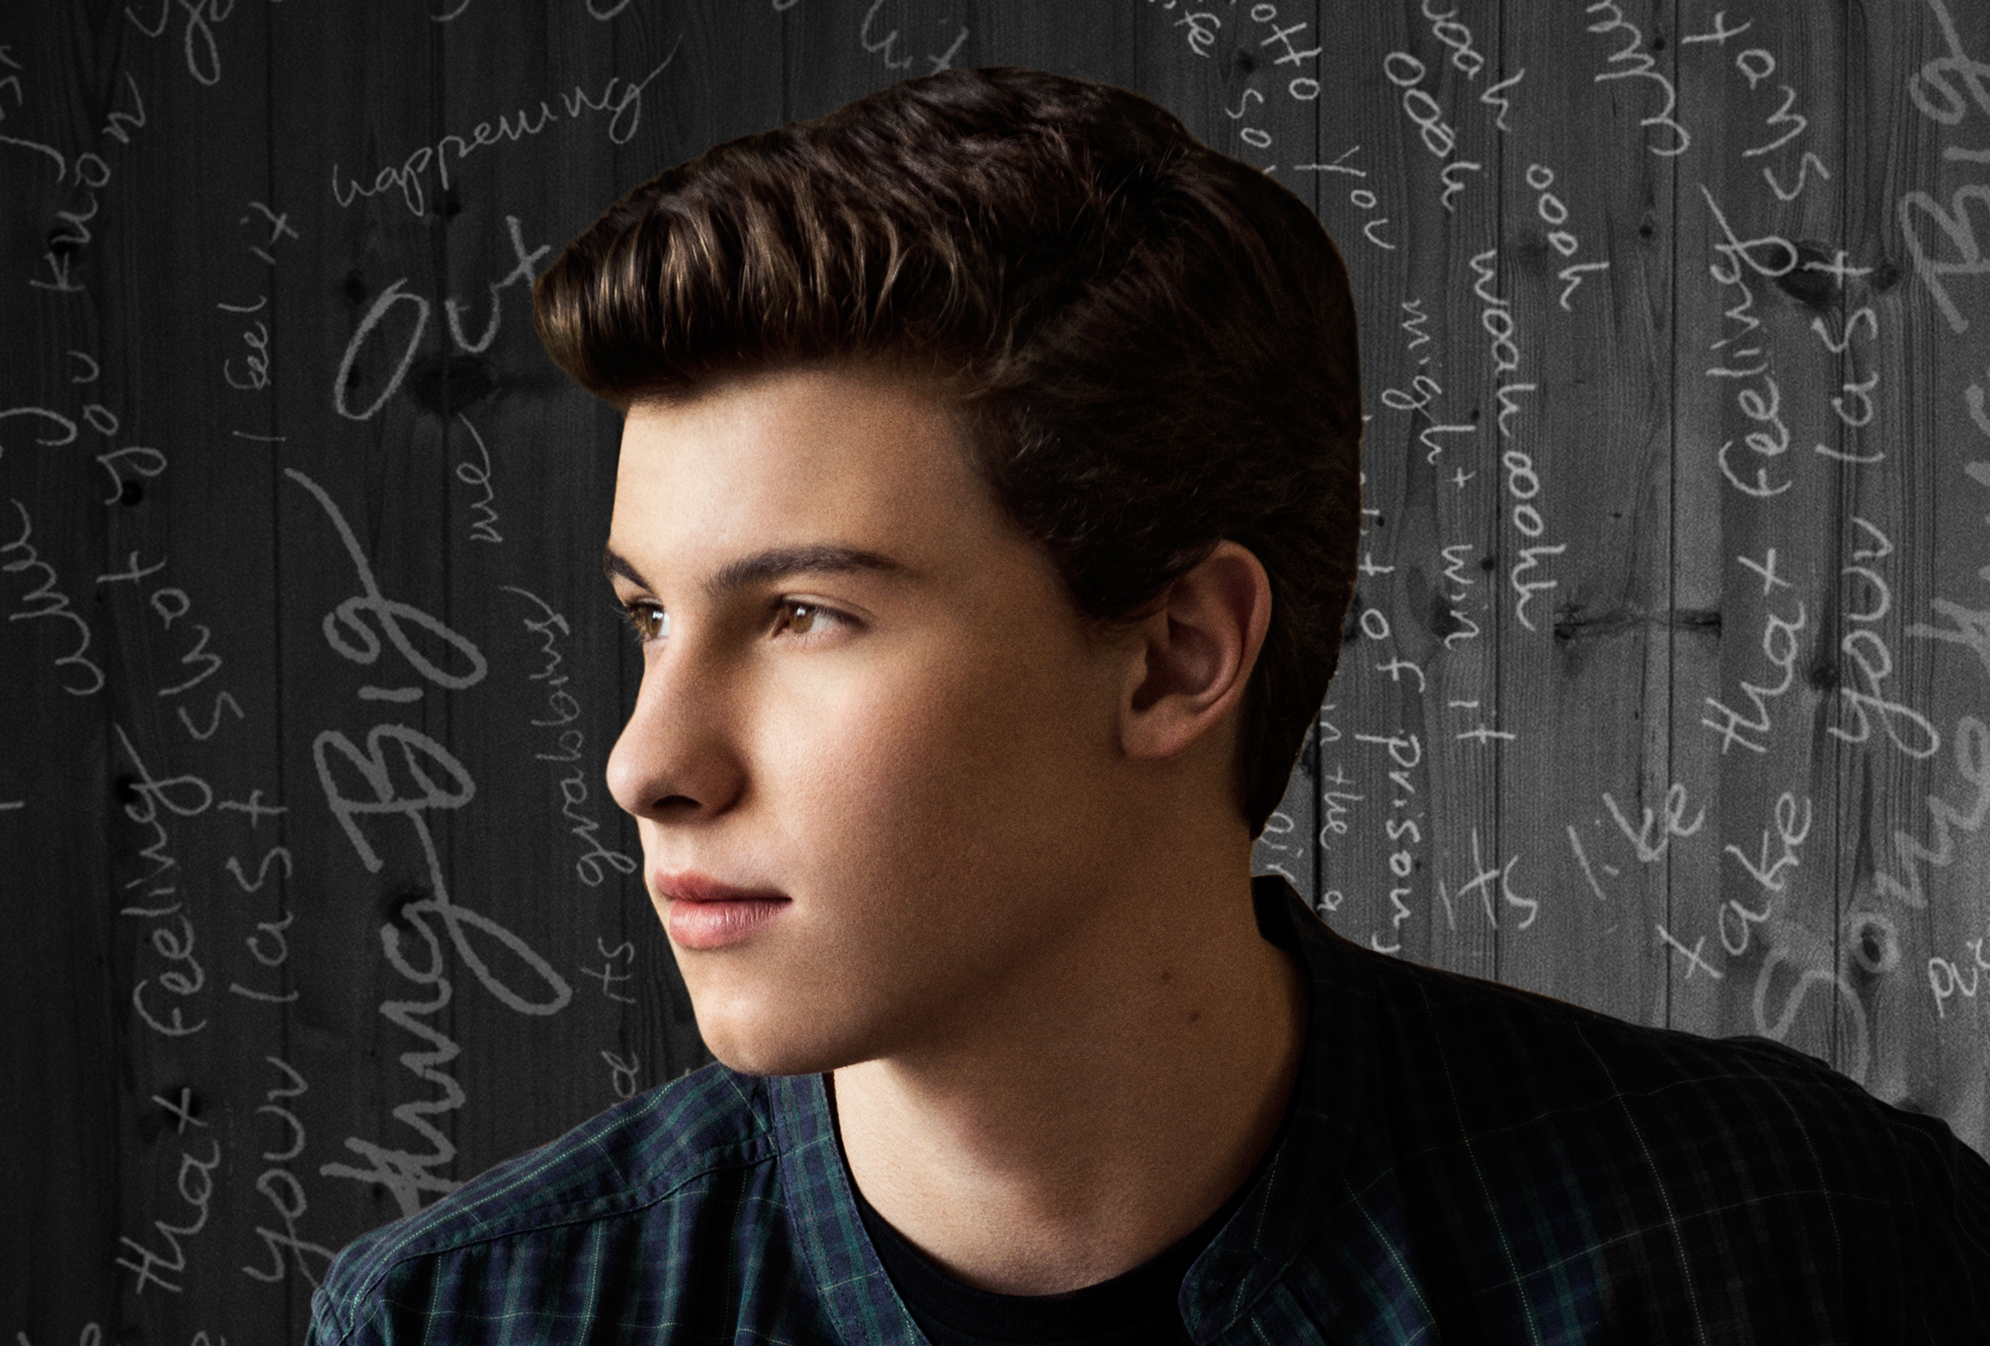 Shawn Mendes on his new album: “I’ve never felt so attached to a record”